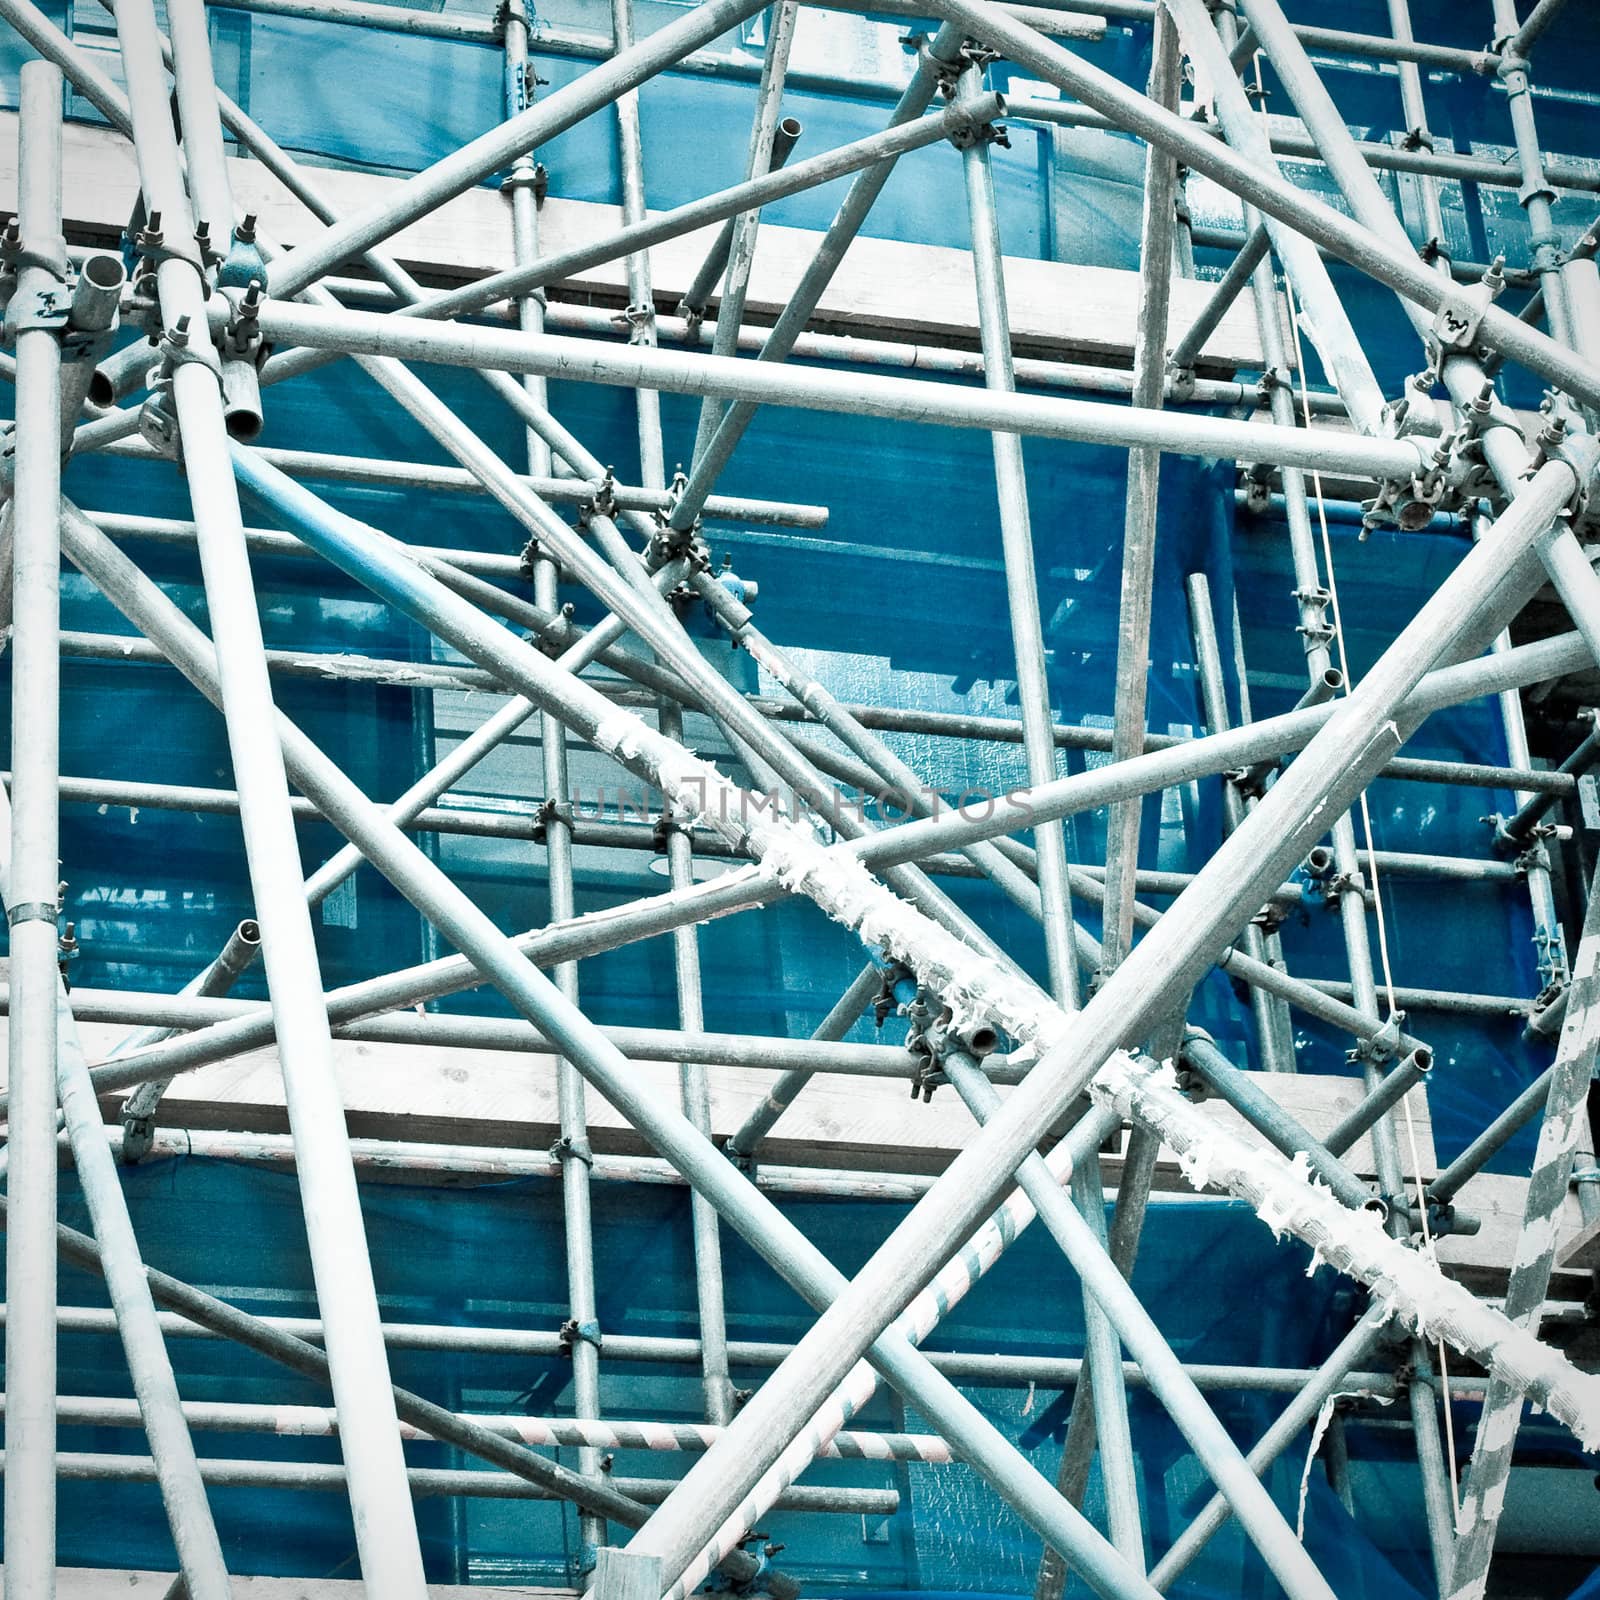 Abstract image of a complicated arrangement of metal bars as part of scaffolding